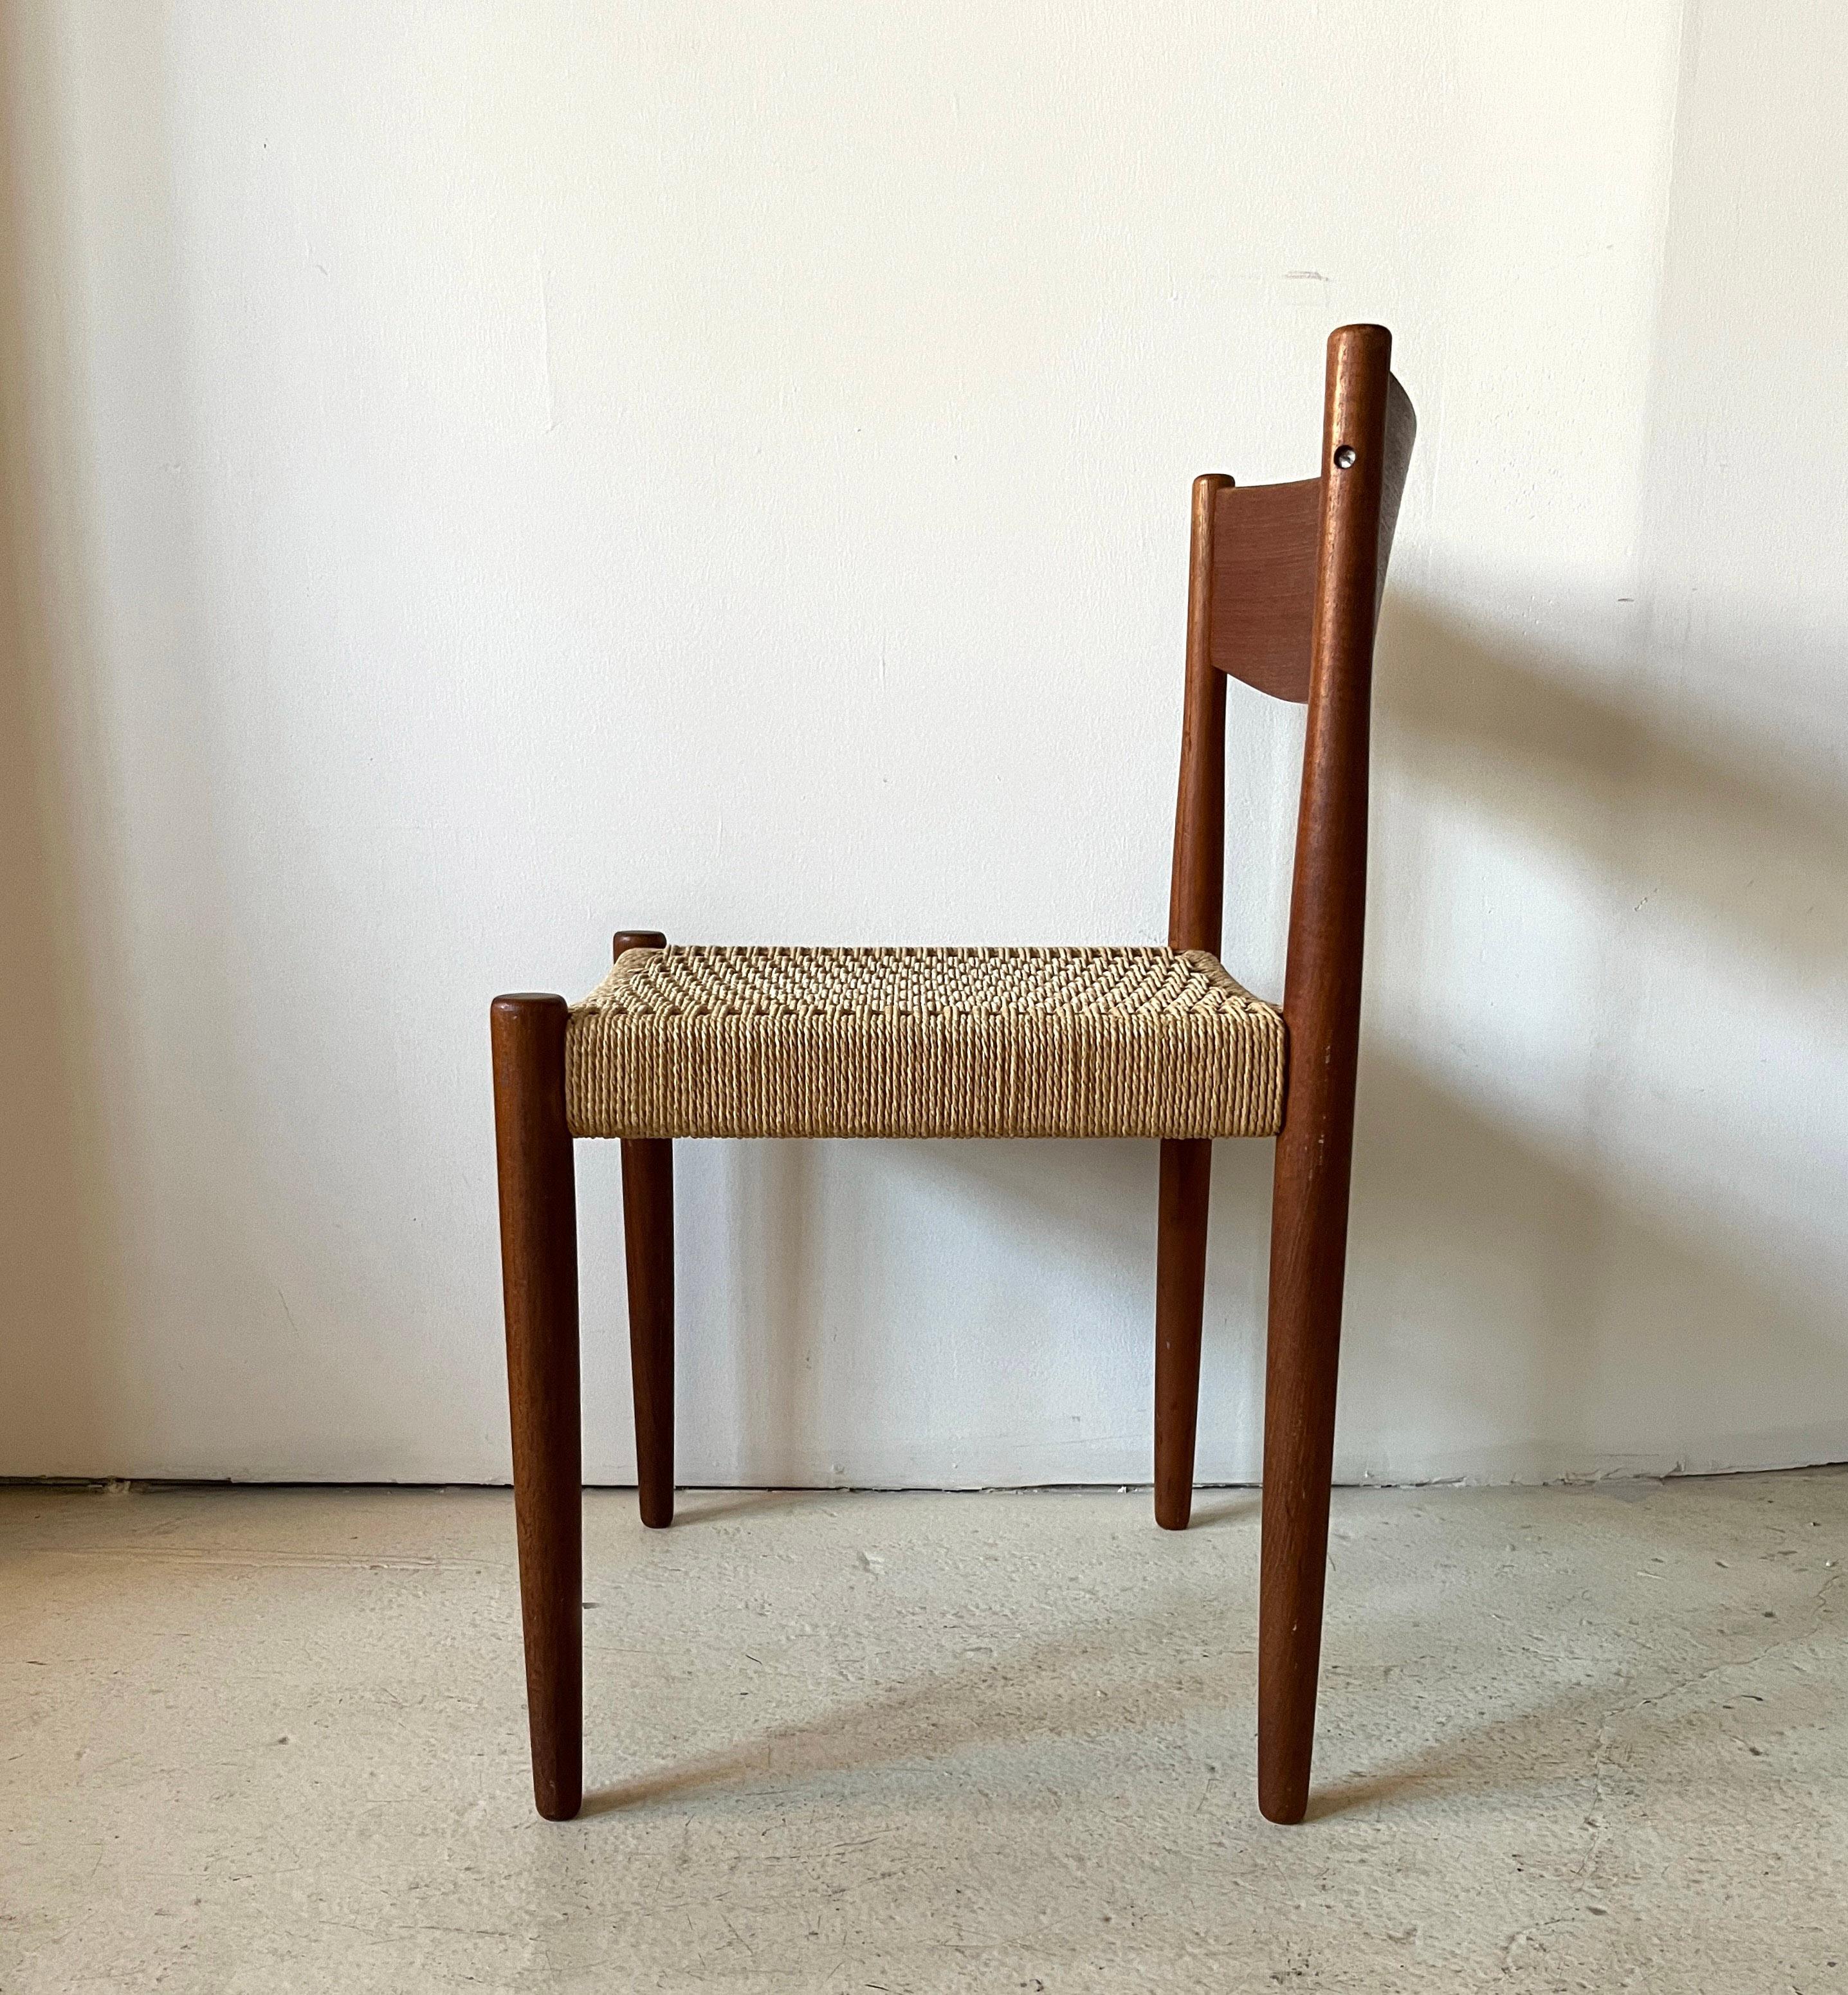 Teak Danish Modern Dining Chair by Poul Volther for Frem Røjle  In Good Condition For Sale In Chicago, IL